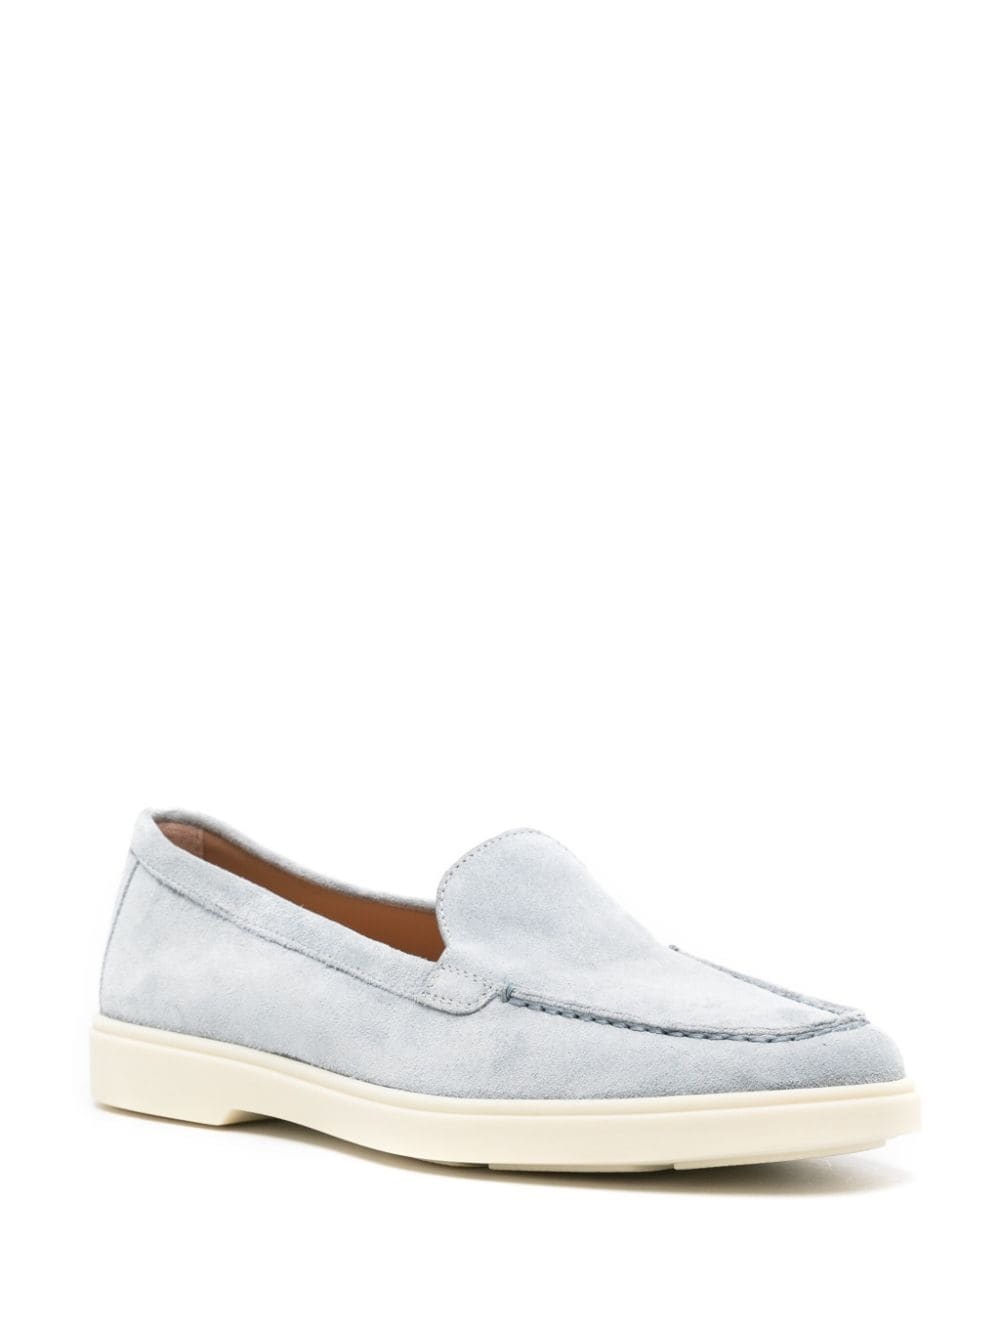 round-toe suede loafers - 2